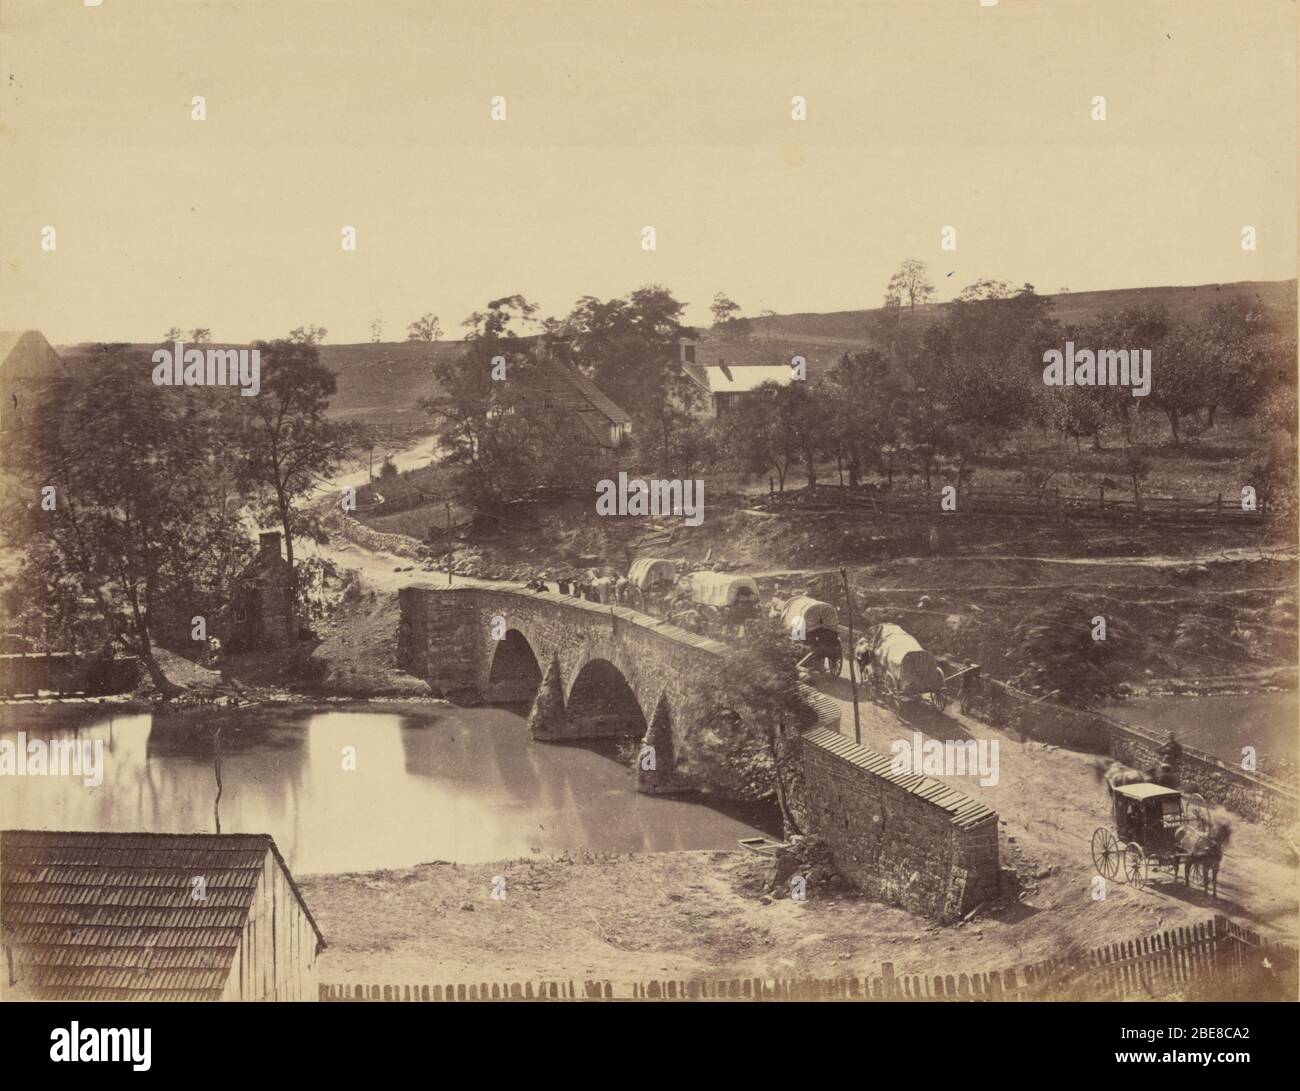 'English: Burnside's Bridge (Antietam Bridge), near Antietam, Maryland, in autumn 1862.  Site of the 'afternoon battle' of the Sept. 1862 Battle of Antietam. The caption on the original says ALEX. GARDNER, Photographer, Entered according to act of Congress, in the year 1866, by A. Gardner, in the Clerk's Office of the District Court of the District of Columbia. 511 Seventh Street, Washington. The previous page says:  Antietam Bridge, Maryland.   This structure crosses Antietam Creek on the turnpike leading from Boonesboro to Sharpsburg, and is one of the memorable spots in the history of the w Stock Photo